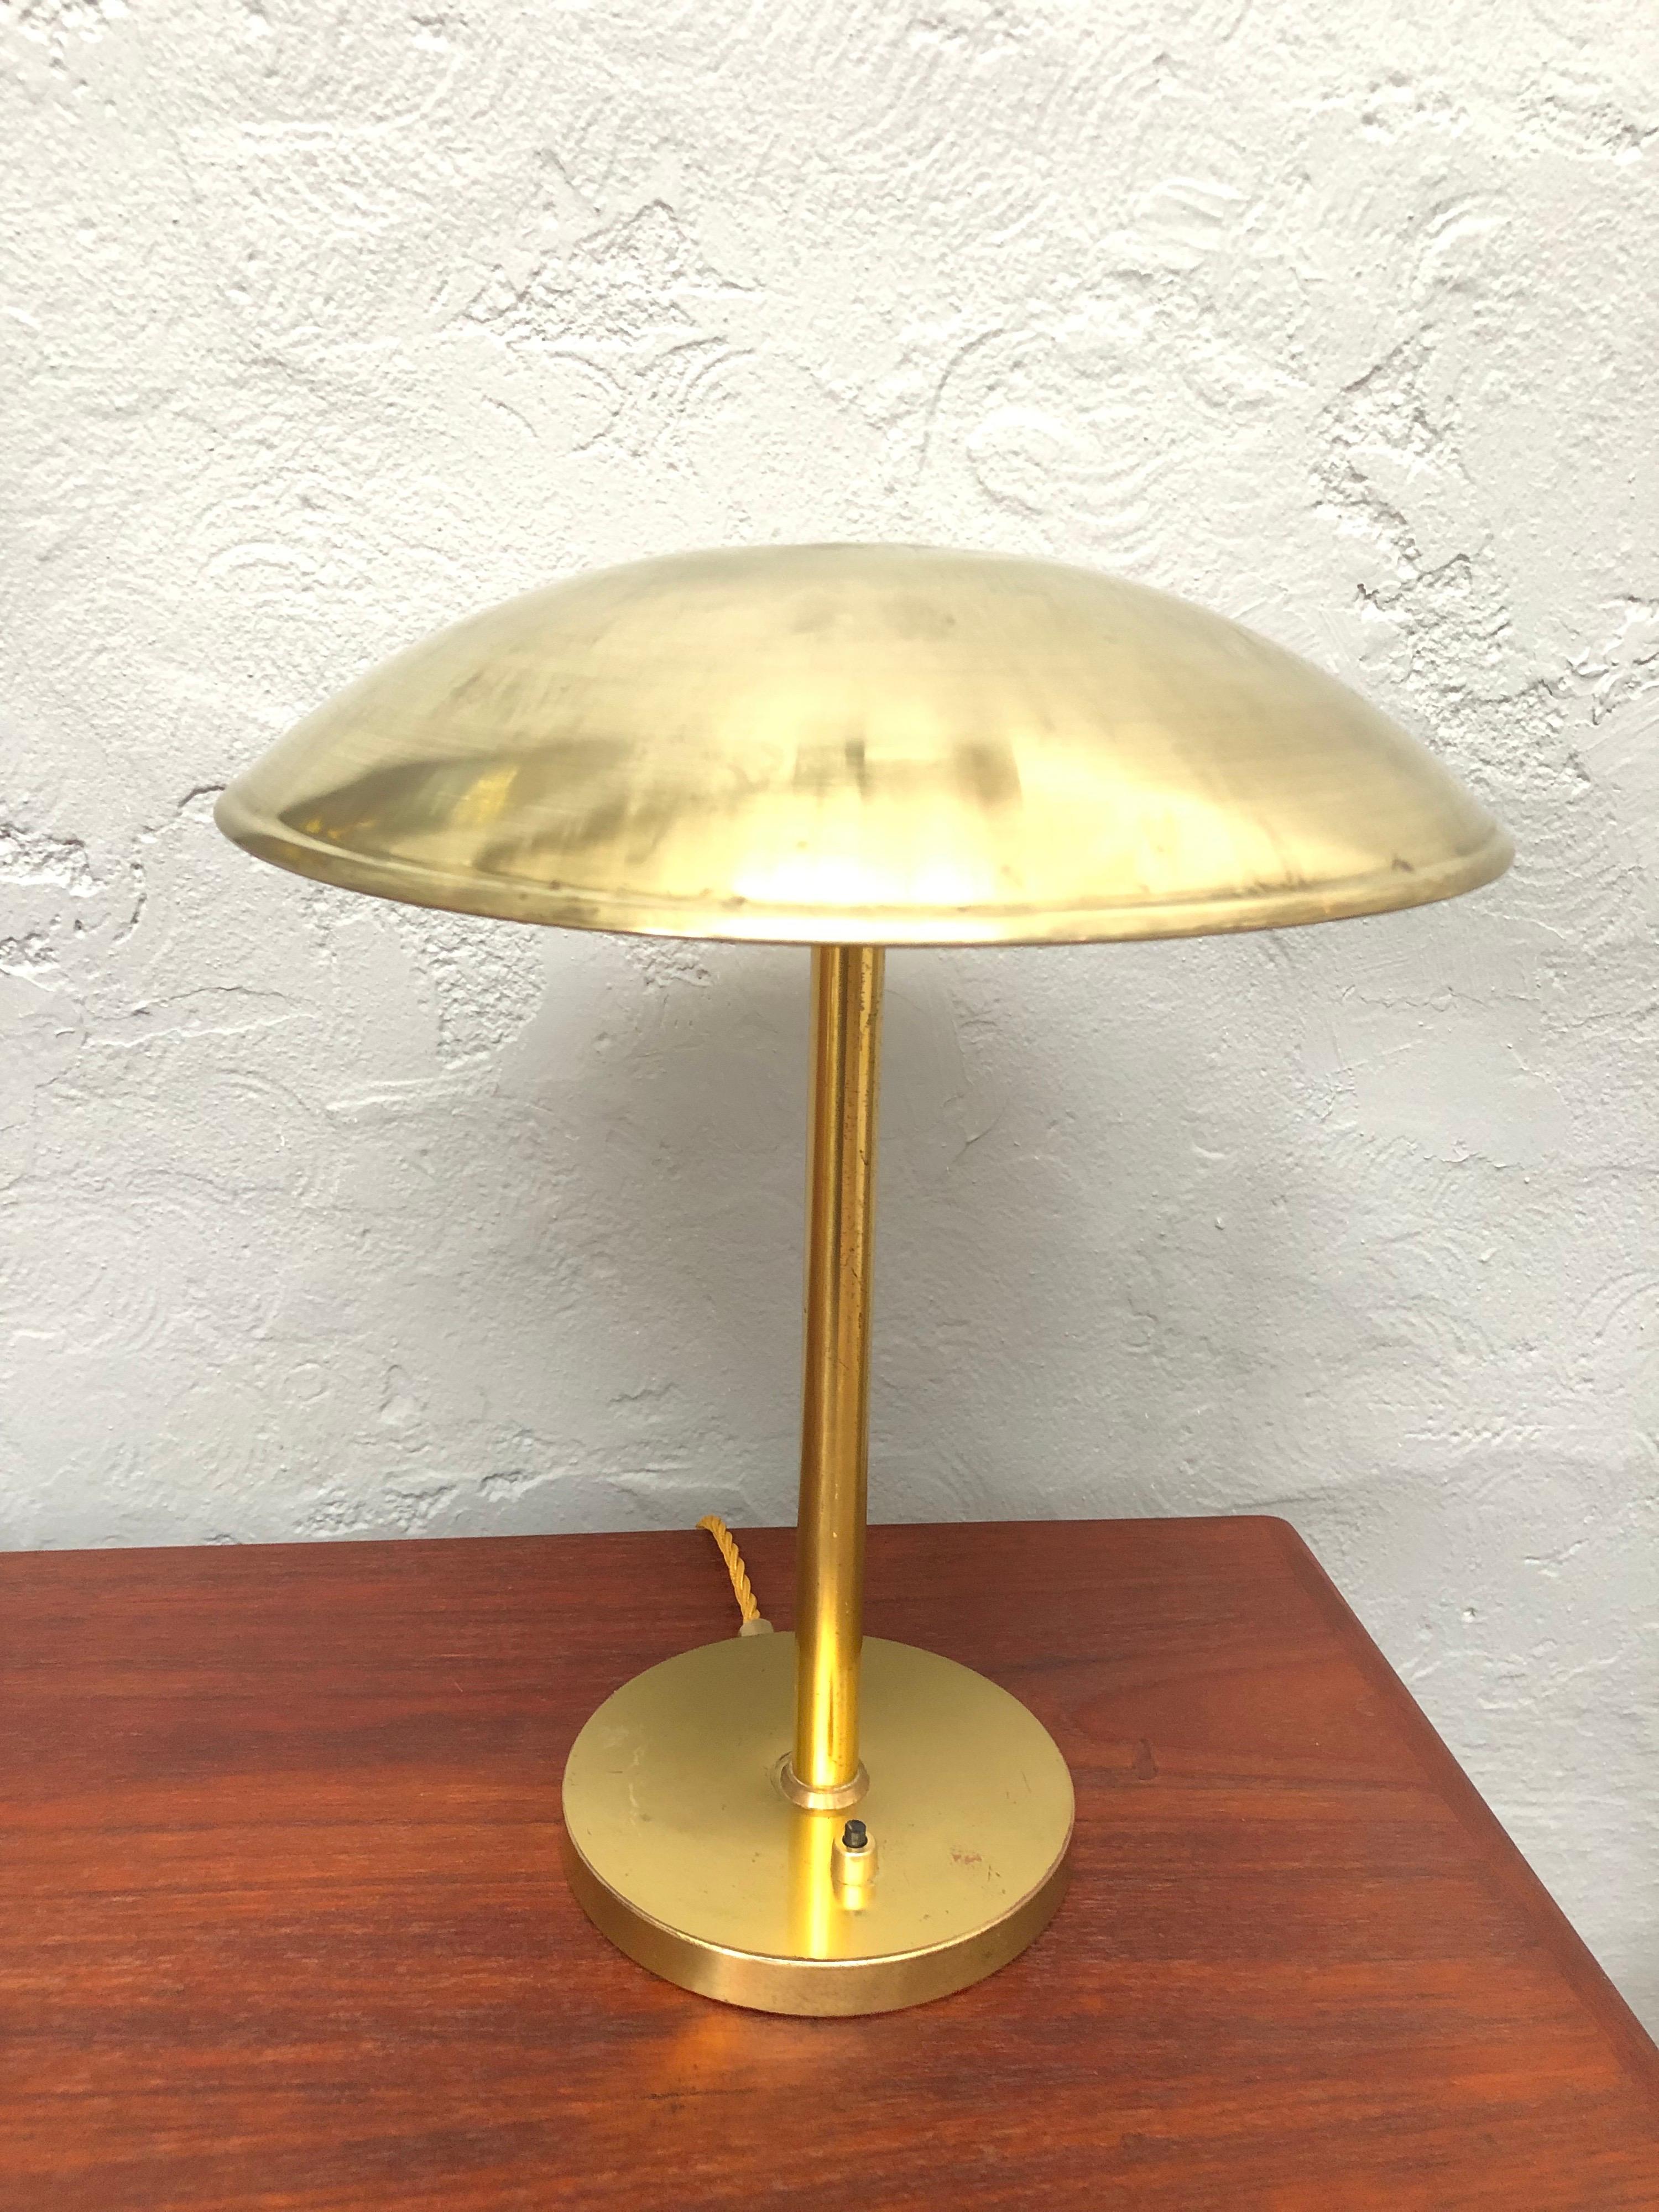 Scandinavian Modern Danish Modernist Table Lamp in Brass from the 1940s by Lyfa With Provenance